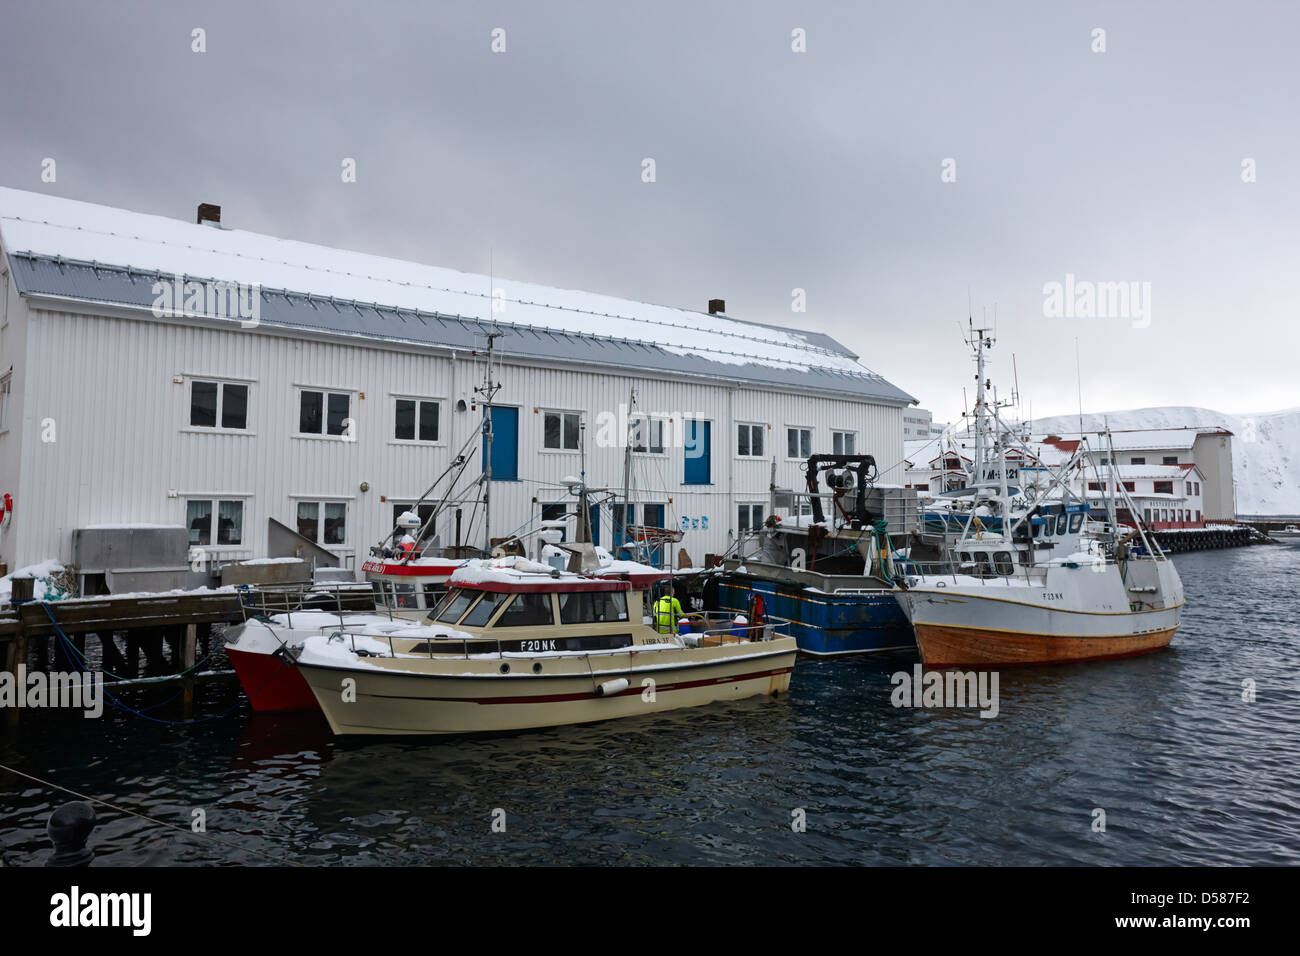 old warehouses and small fishing boats Honningsvag harbour finnmark norway europe Stock Photo